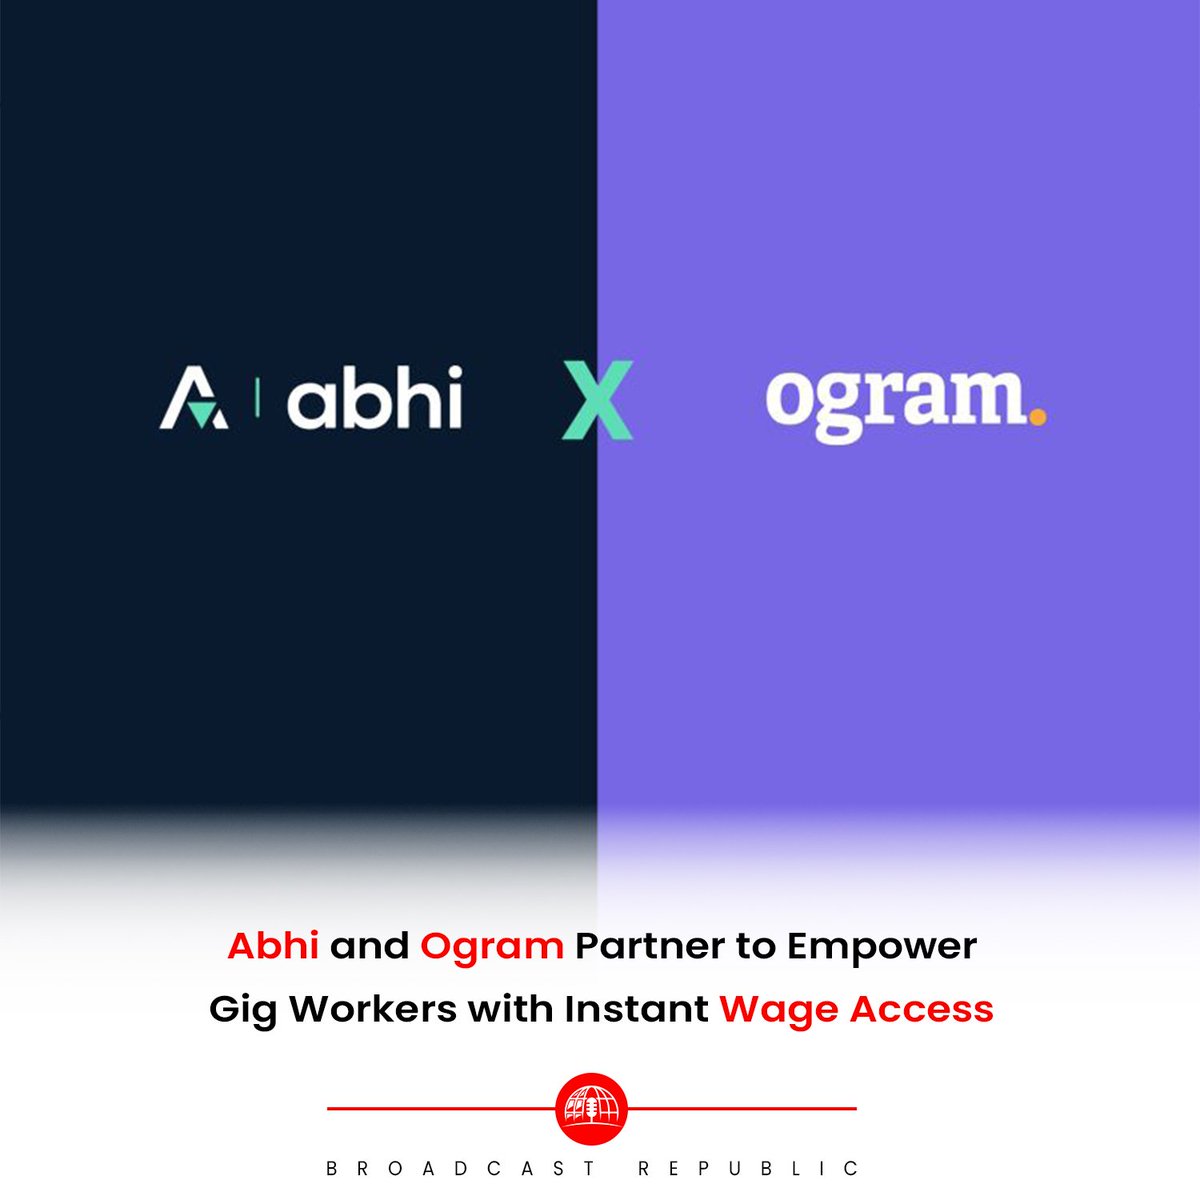 Abhi (YC S21), a fintech company, has joined forces with Ogram, an on-demand staffing platform, to provide Ogram's workforce with immediate access to their earned wages. 

#BroadcastRepublic #Abhi #Ogram #fintech #partnership #gigworkers 
🌐 Read More: Broadcastrepublic.com